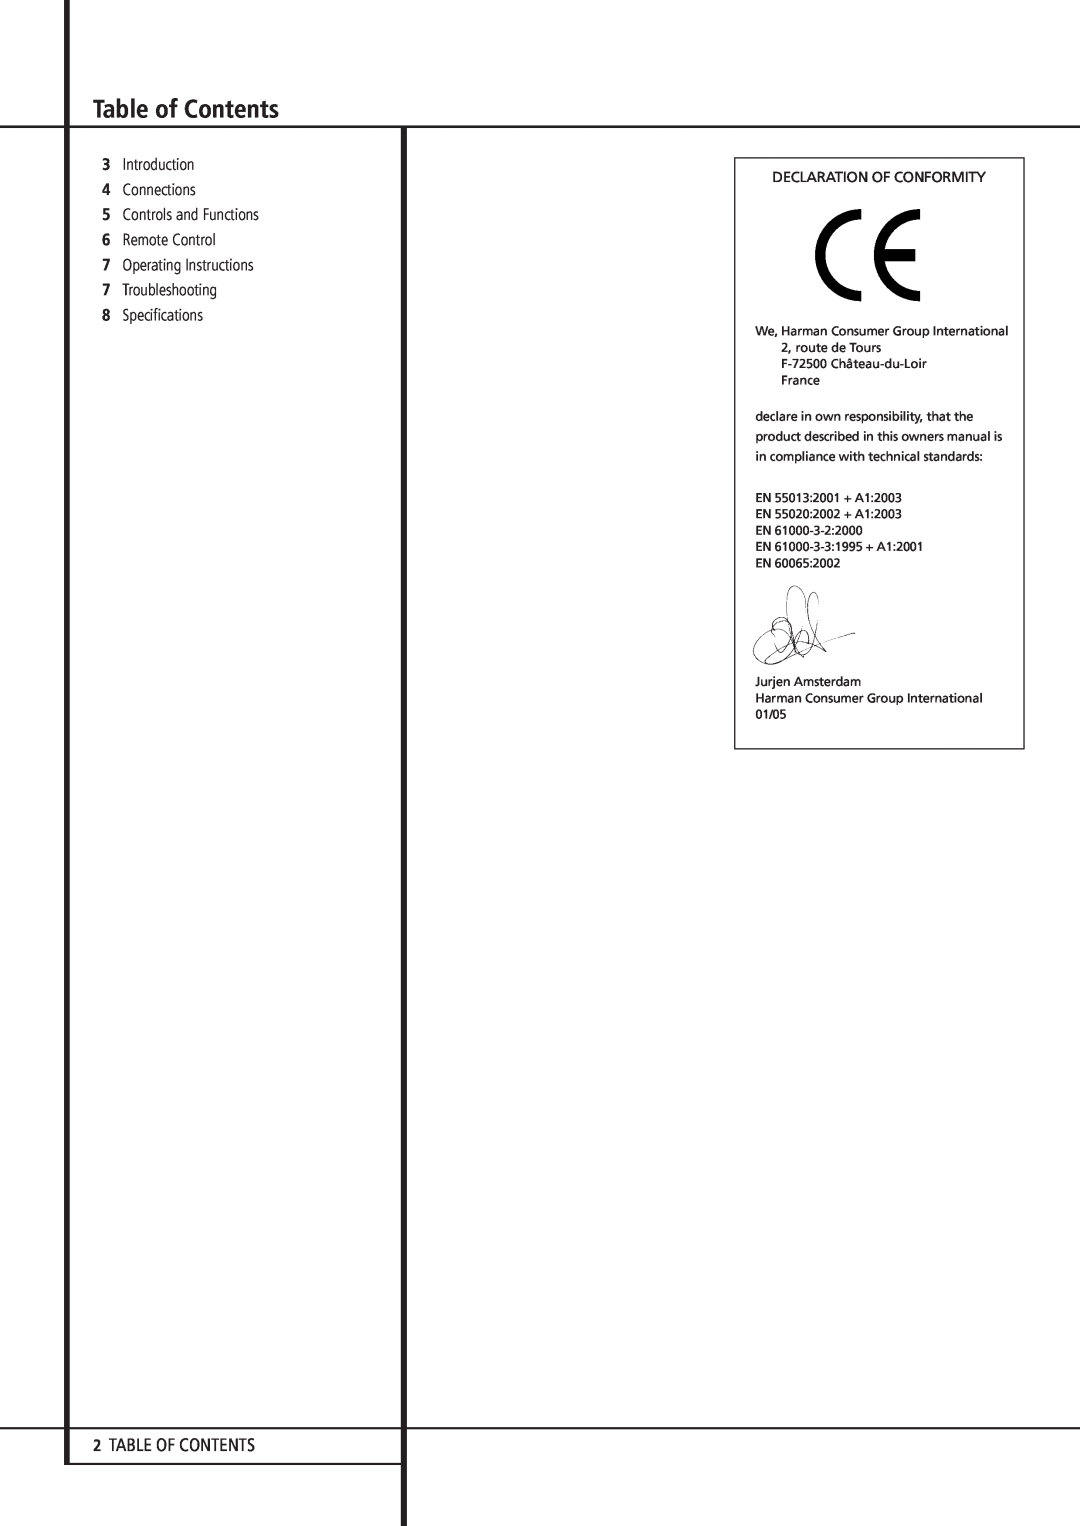 Harman-Kardon HK 970 owner manual Table of Contents, 2TABLE OF CONTENTS 